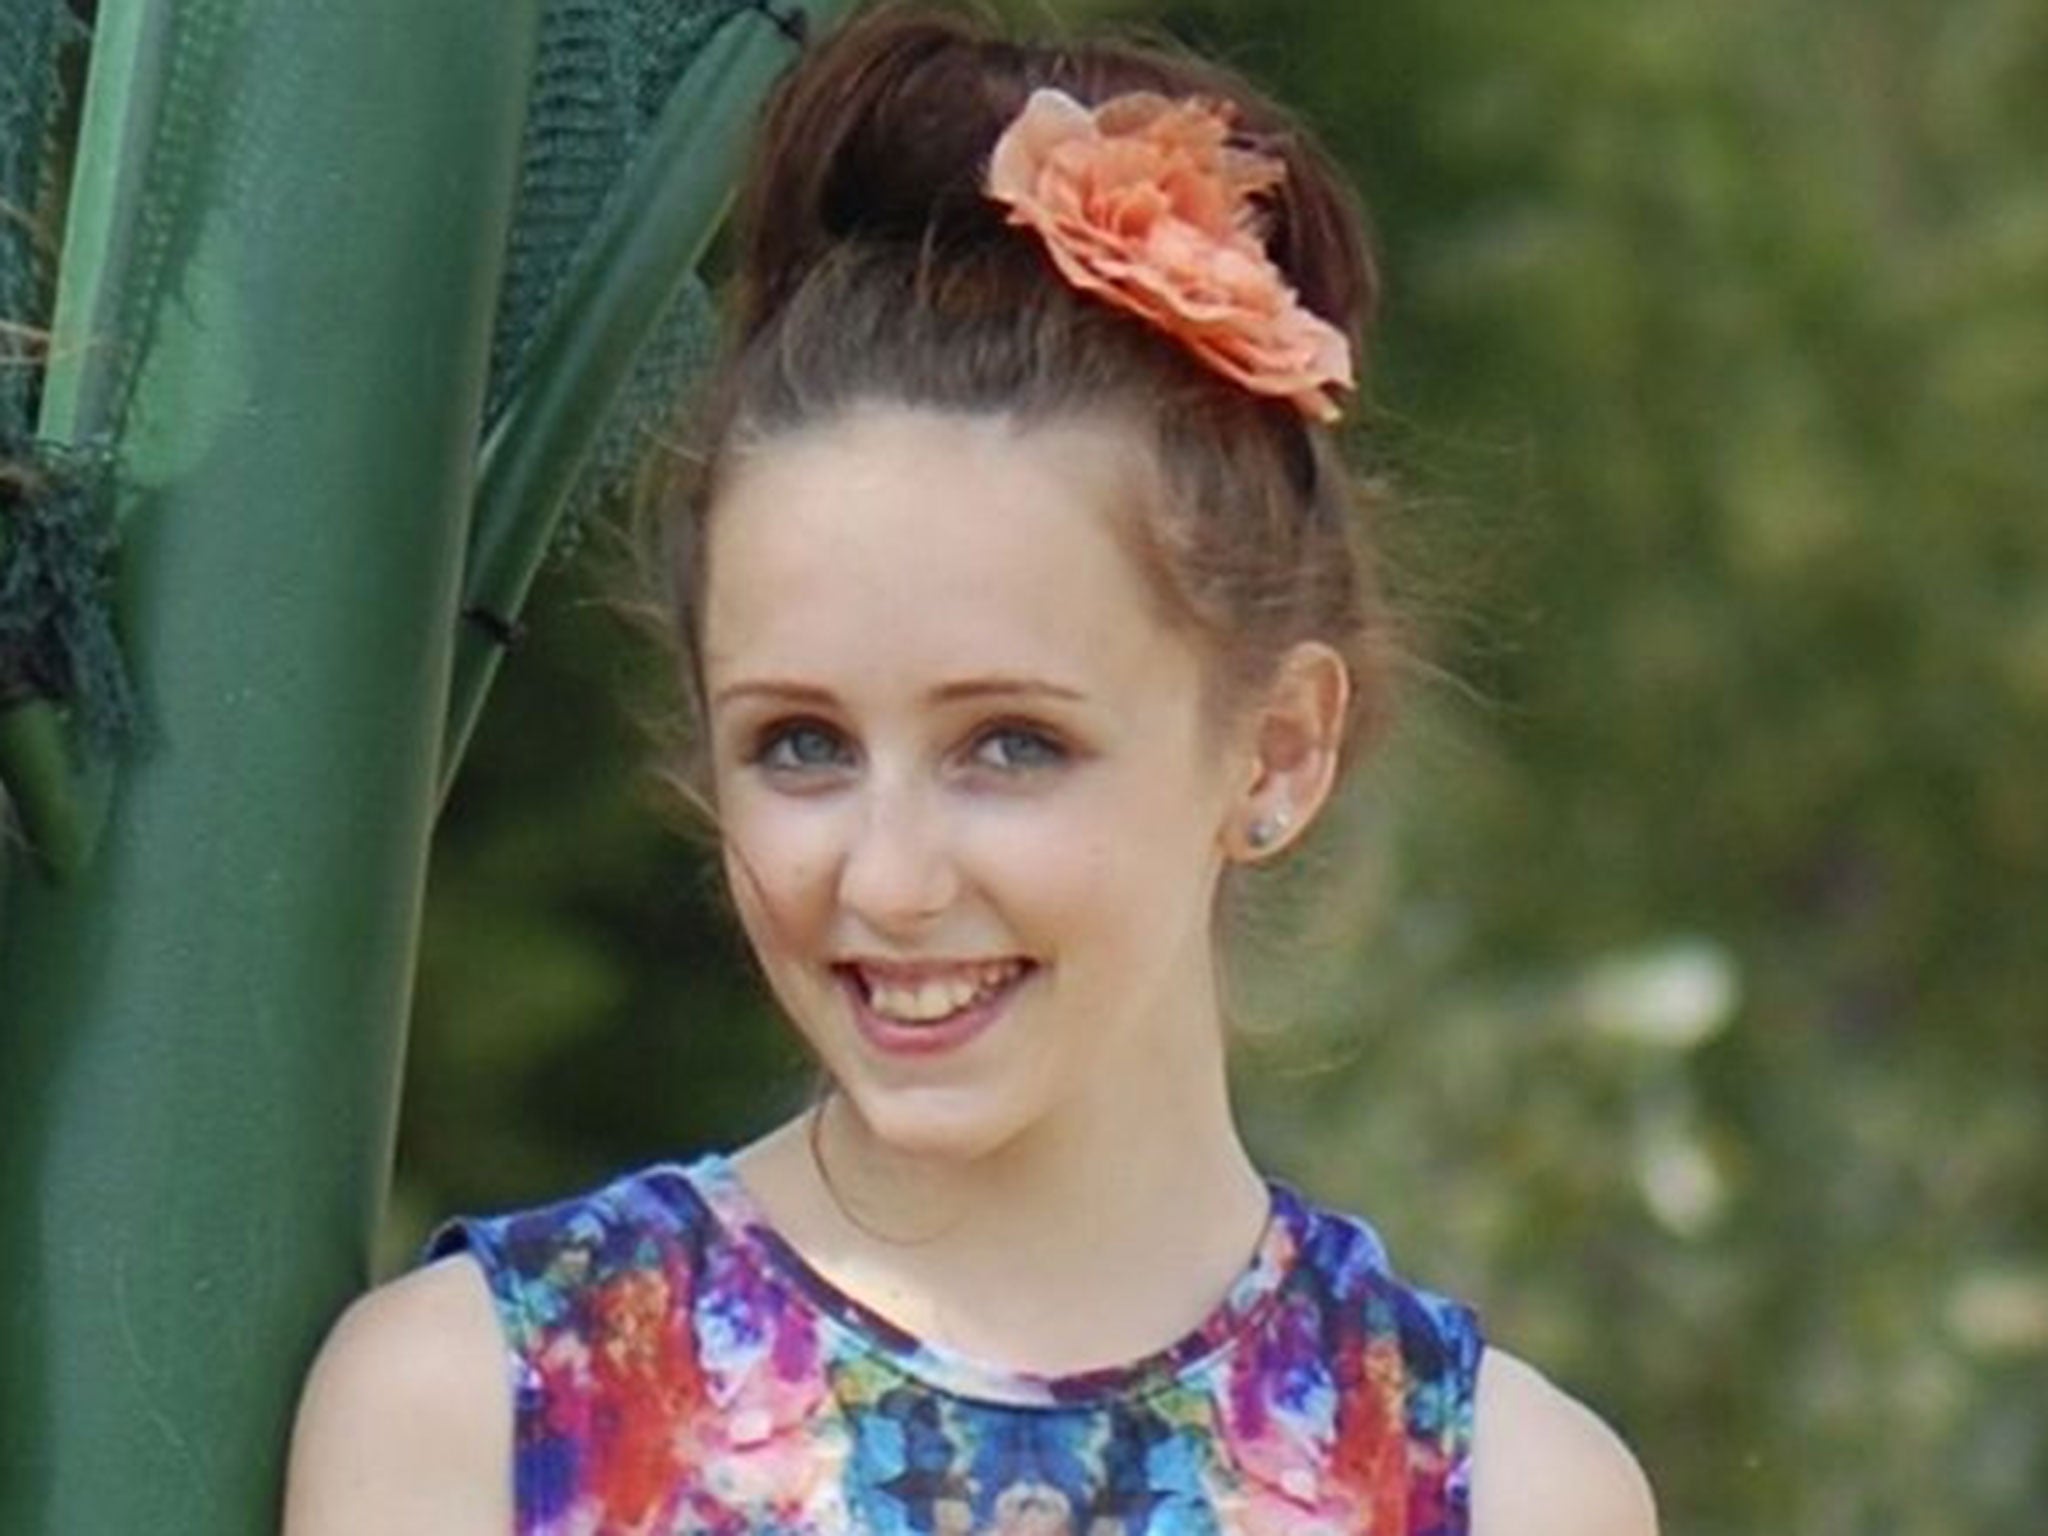 14-year-old Alice Gross